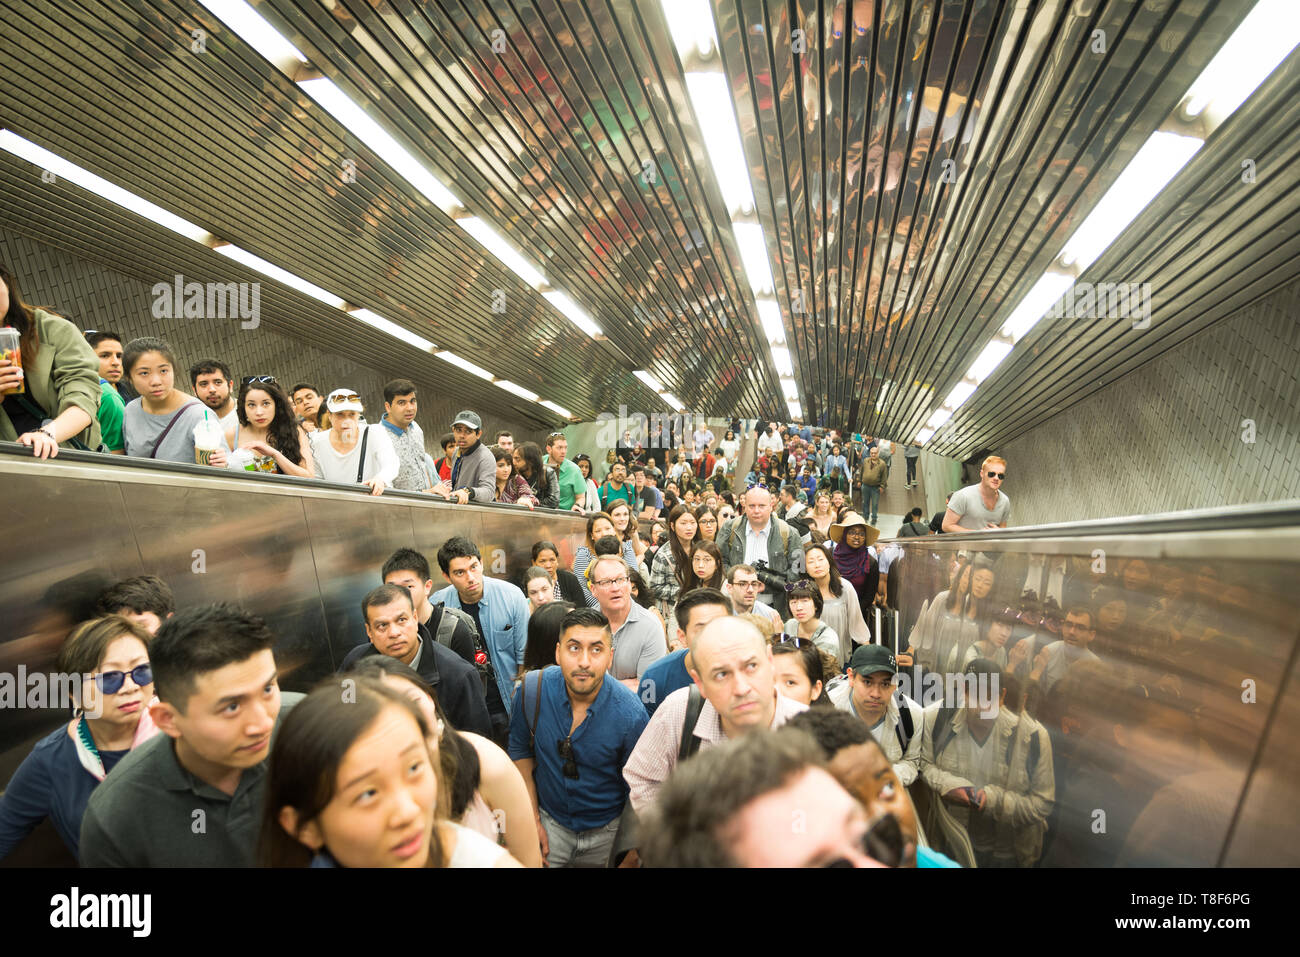 New York City Transit during busy crowded times many people on line to see cherry blossom festivals Stock Photo